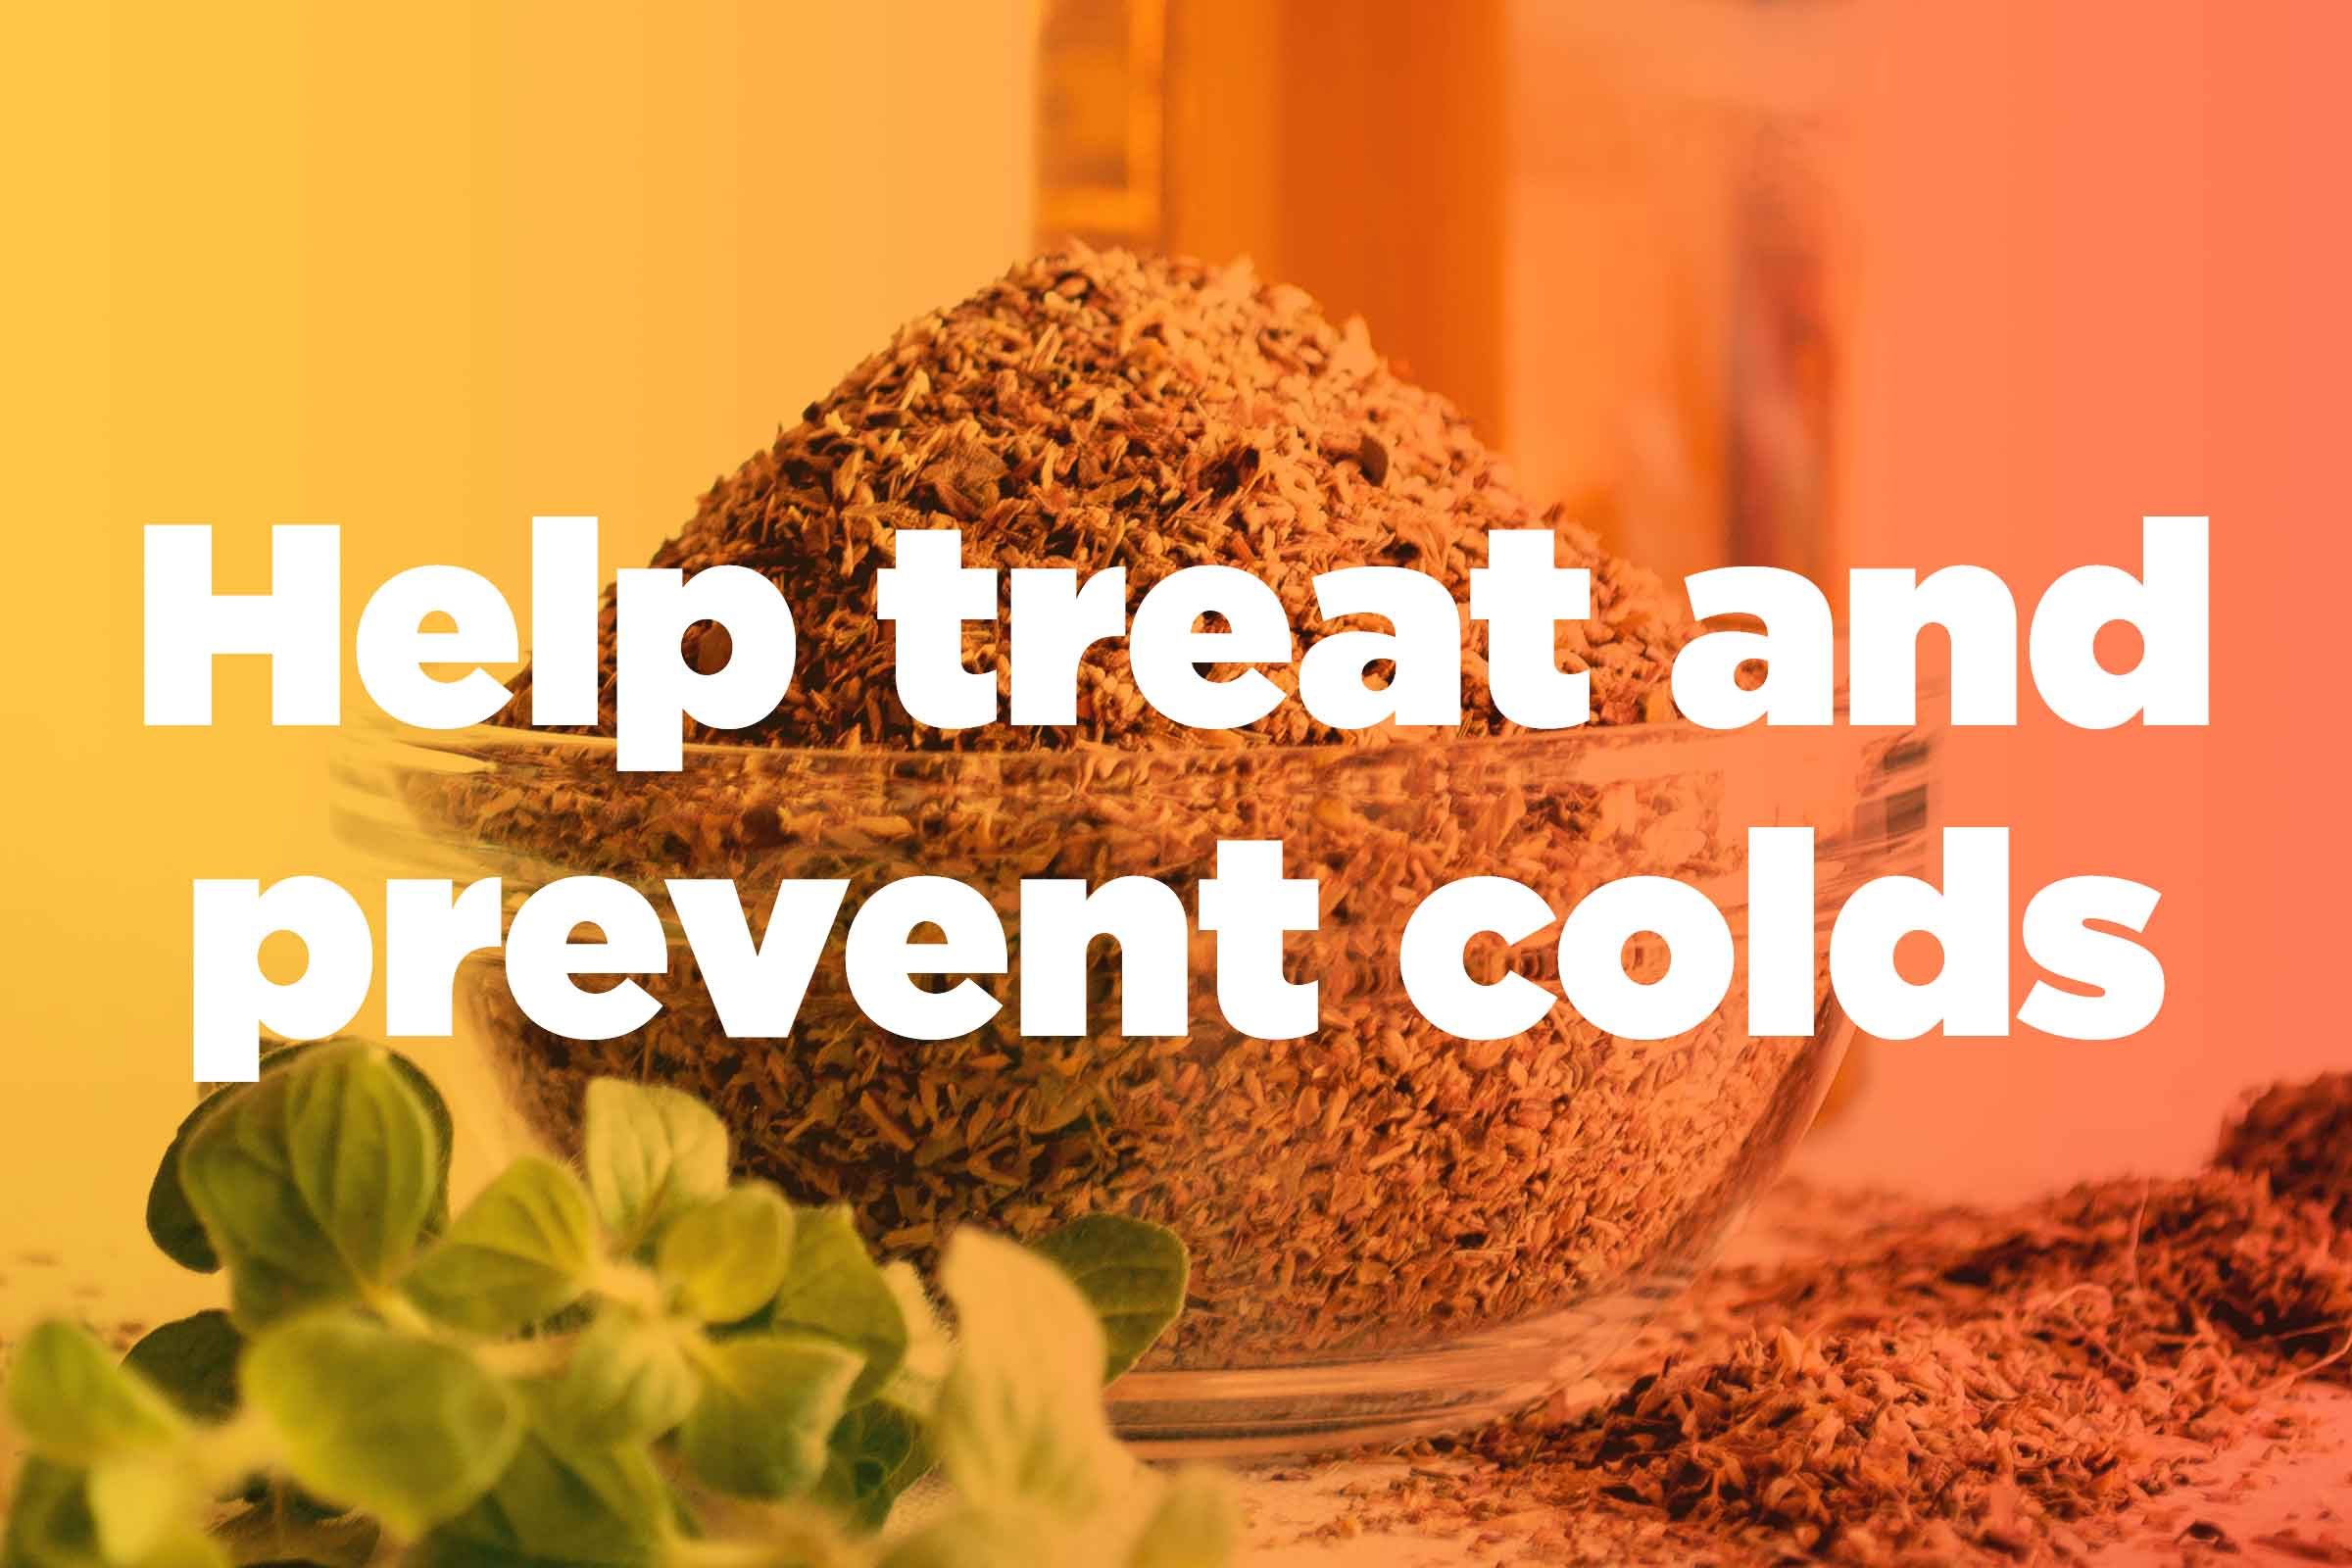 graphic saying "Help treat and prevent colds"